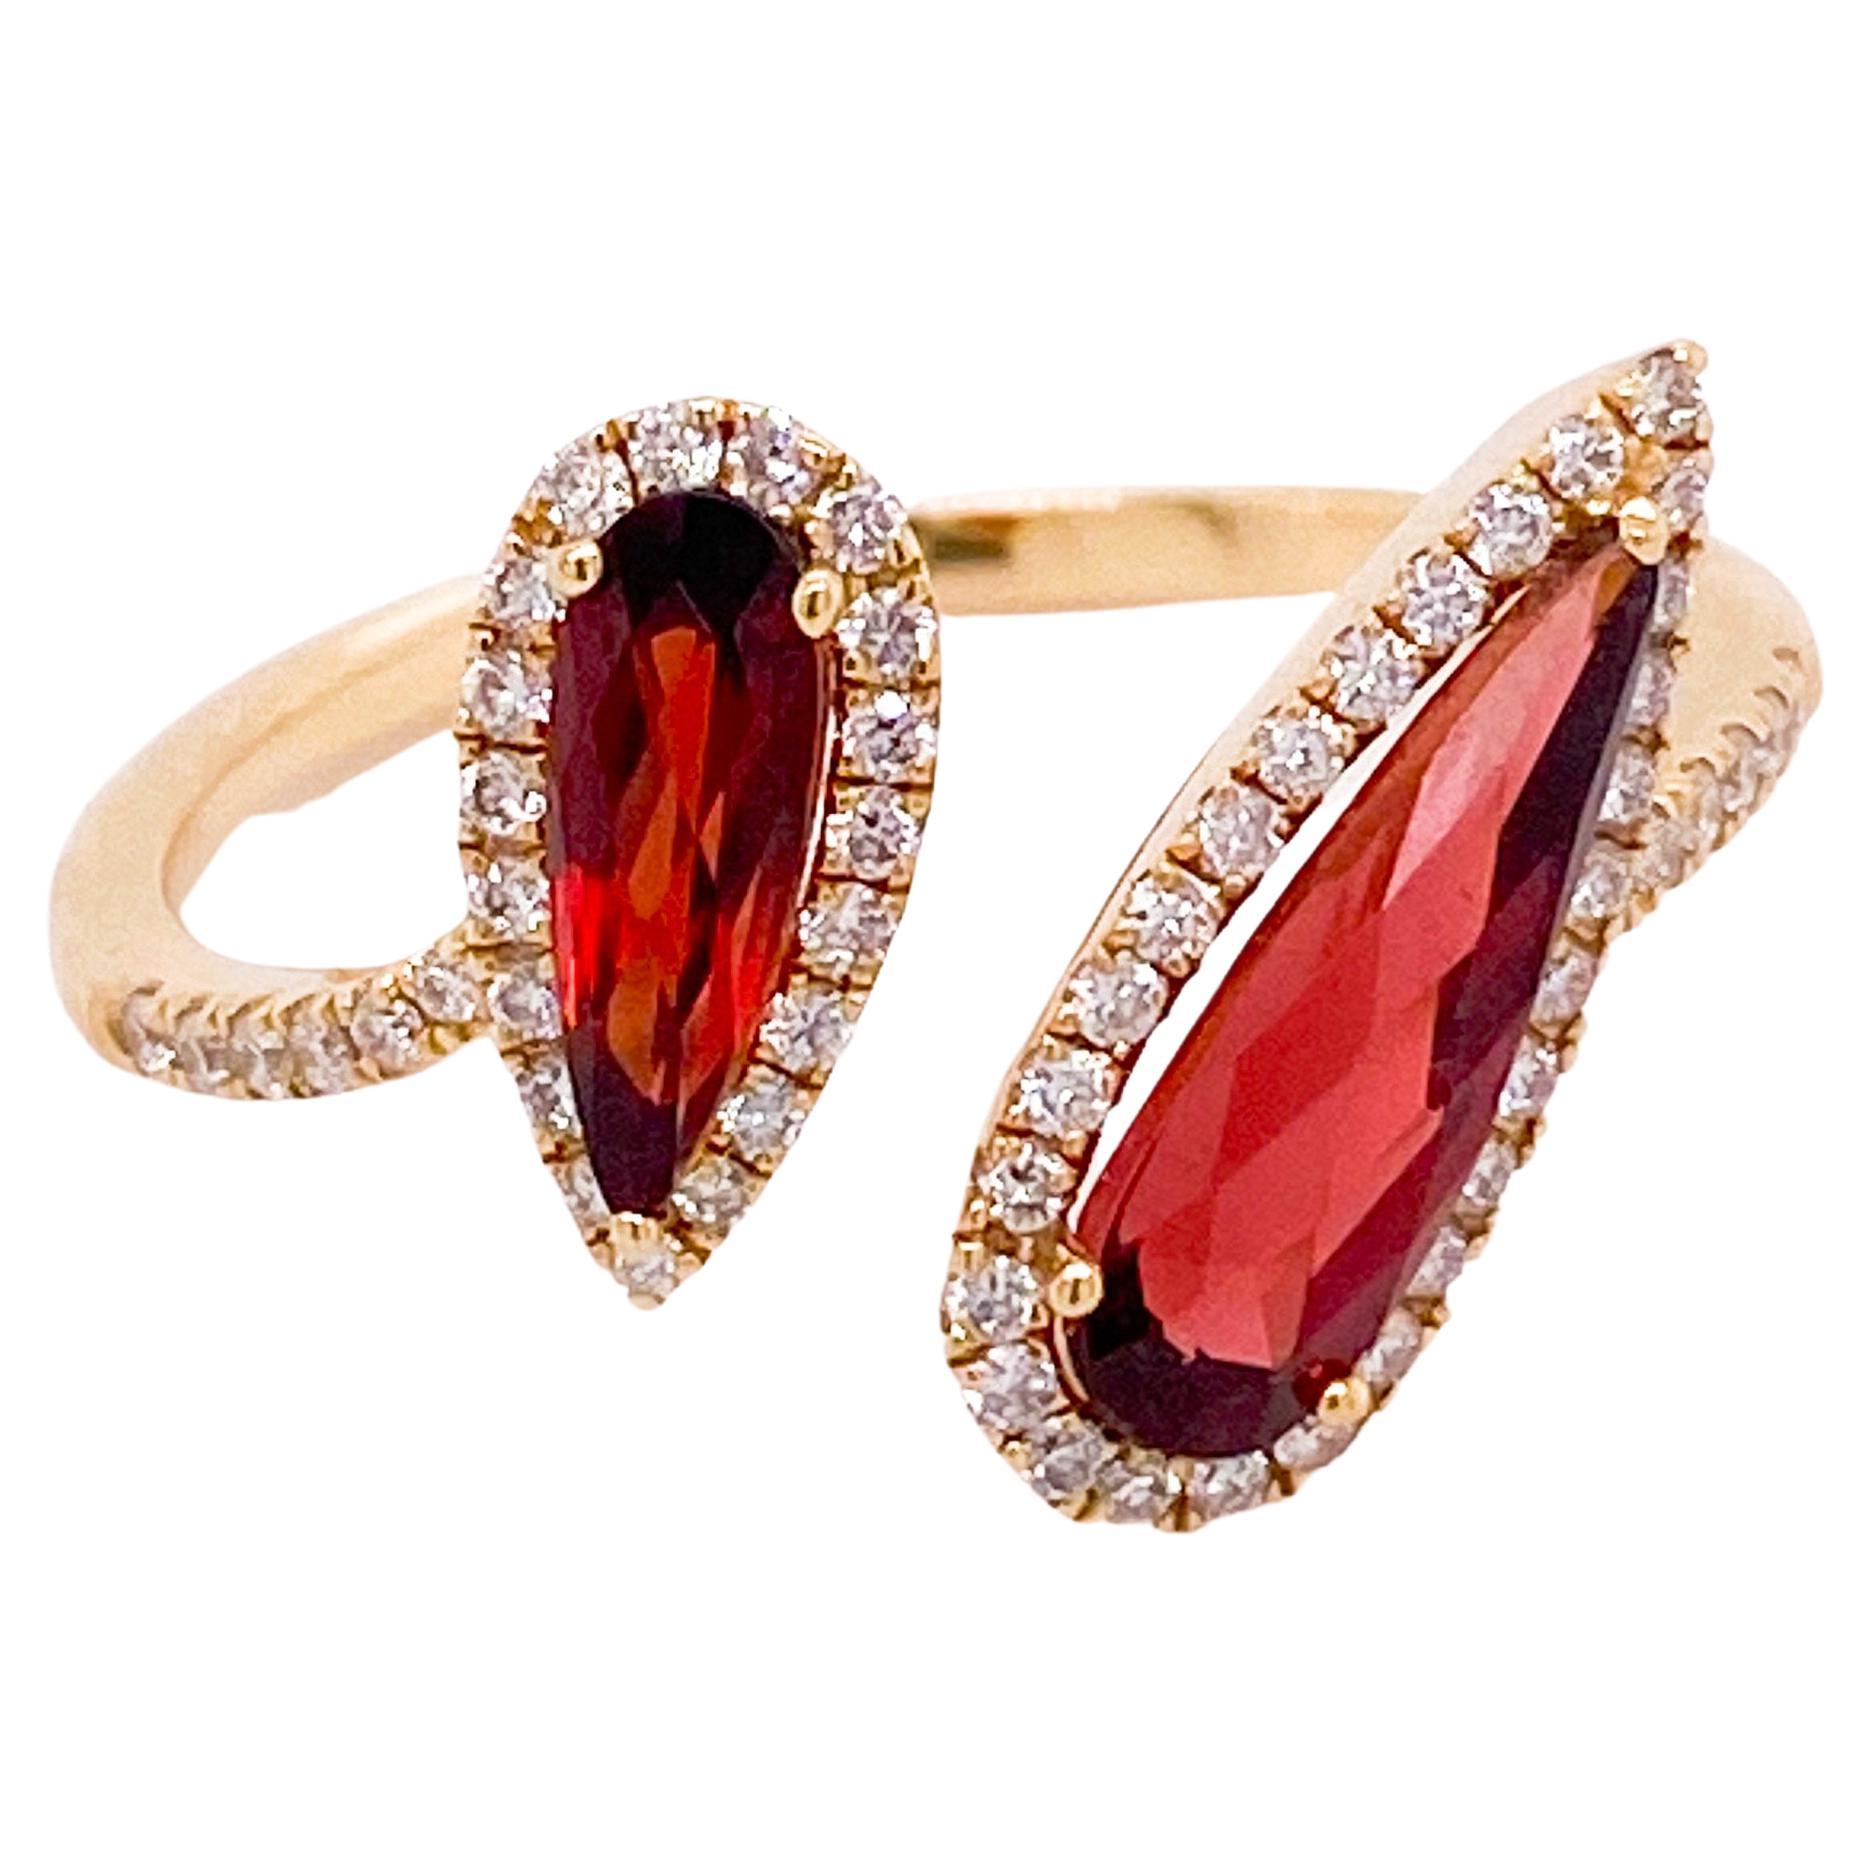 For Sale:  Toi et Moi Garnet Bypass Ring w Diamond Halos You and Me Ring in 14k Gold